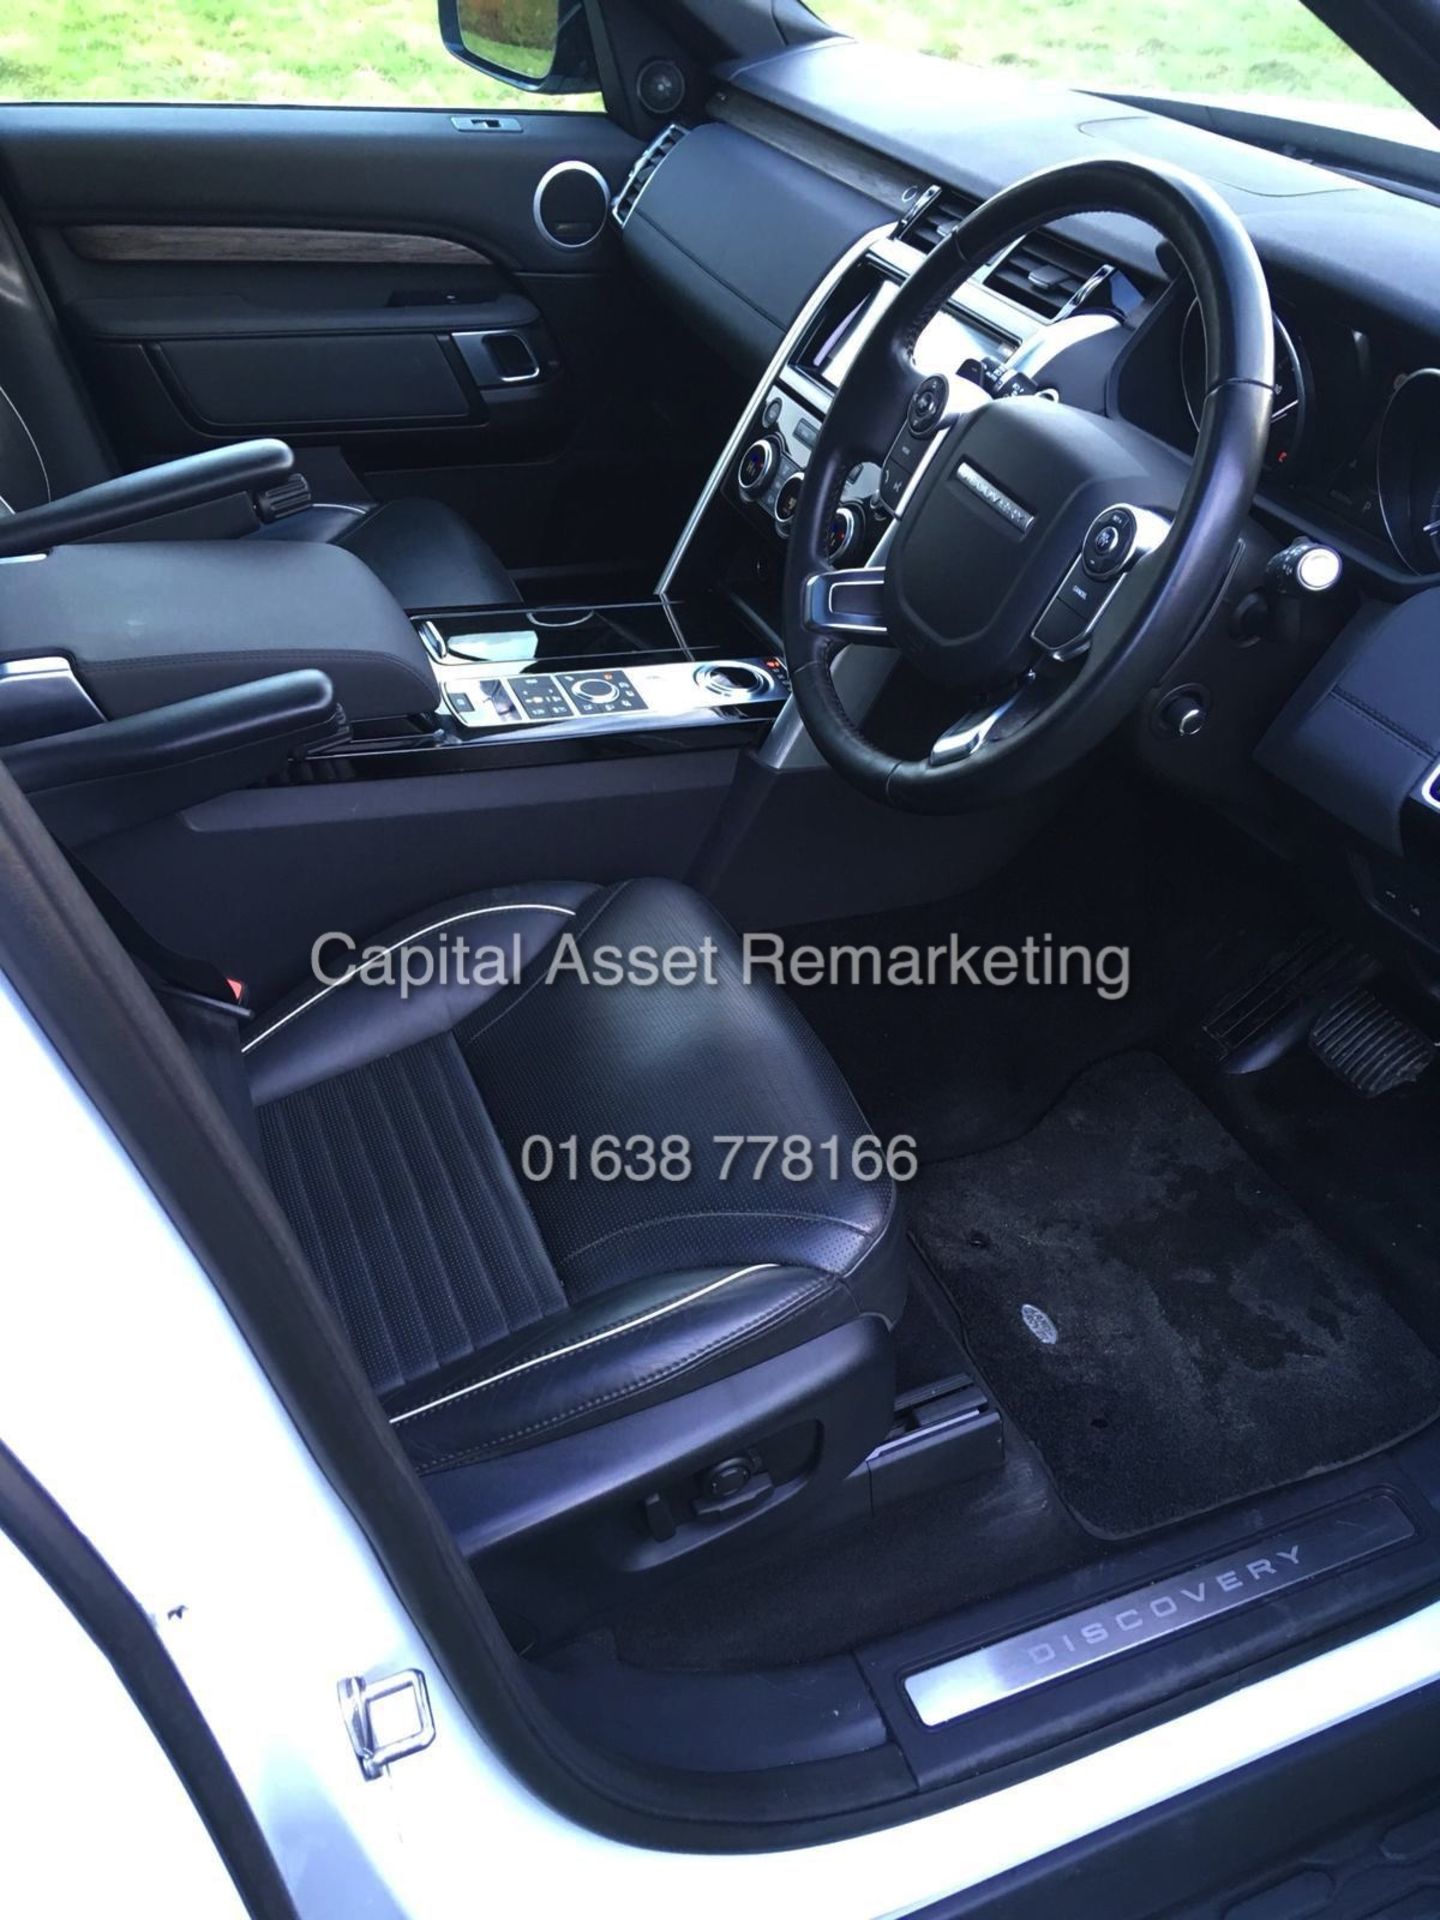 LAND ROVER DISCOVERY 5 "HSE" 3.0TD6 AUTO (17 REG - NEW SHAPE) FULLY LOADED PAN ROOF - SAT NAV *LOOK* - Bild 7 aus 11